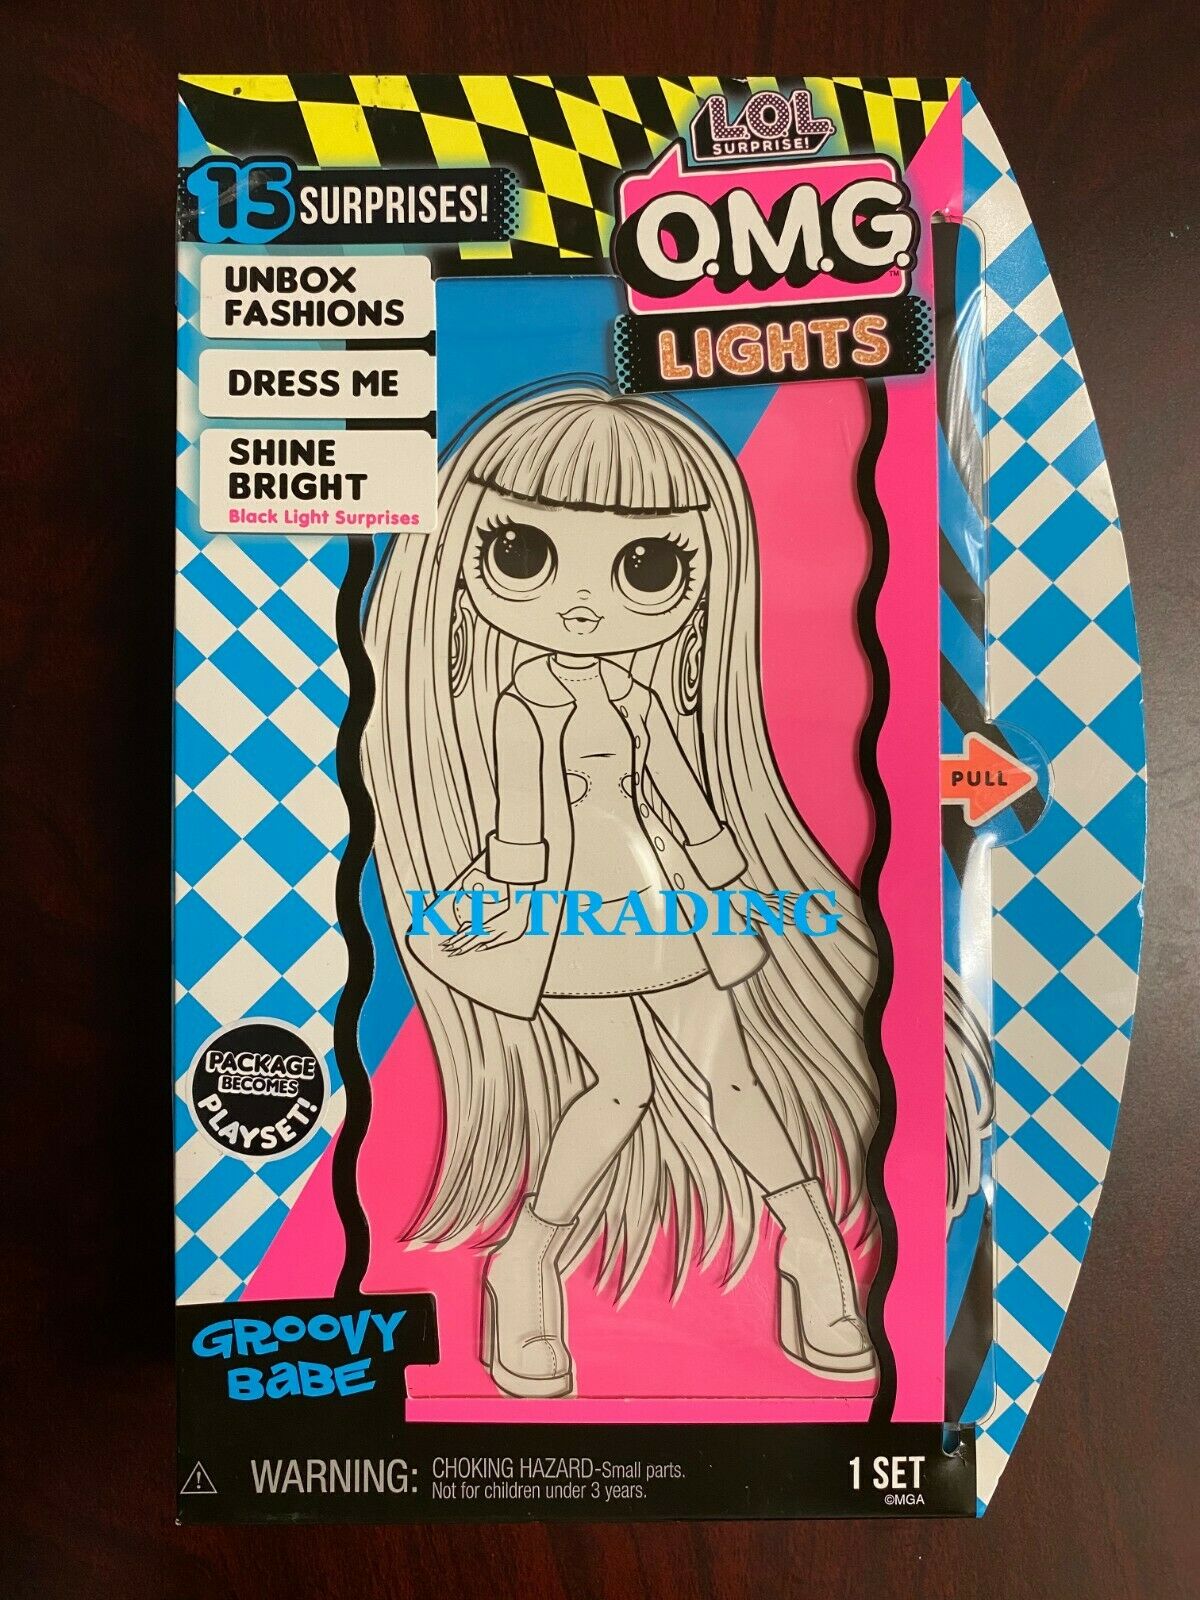 GENUINE LOL Surprise! O.M.G. LIGHTS Groovy Babe Fashion Doll With 15 Surprises!